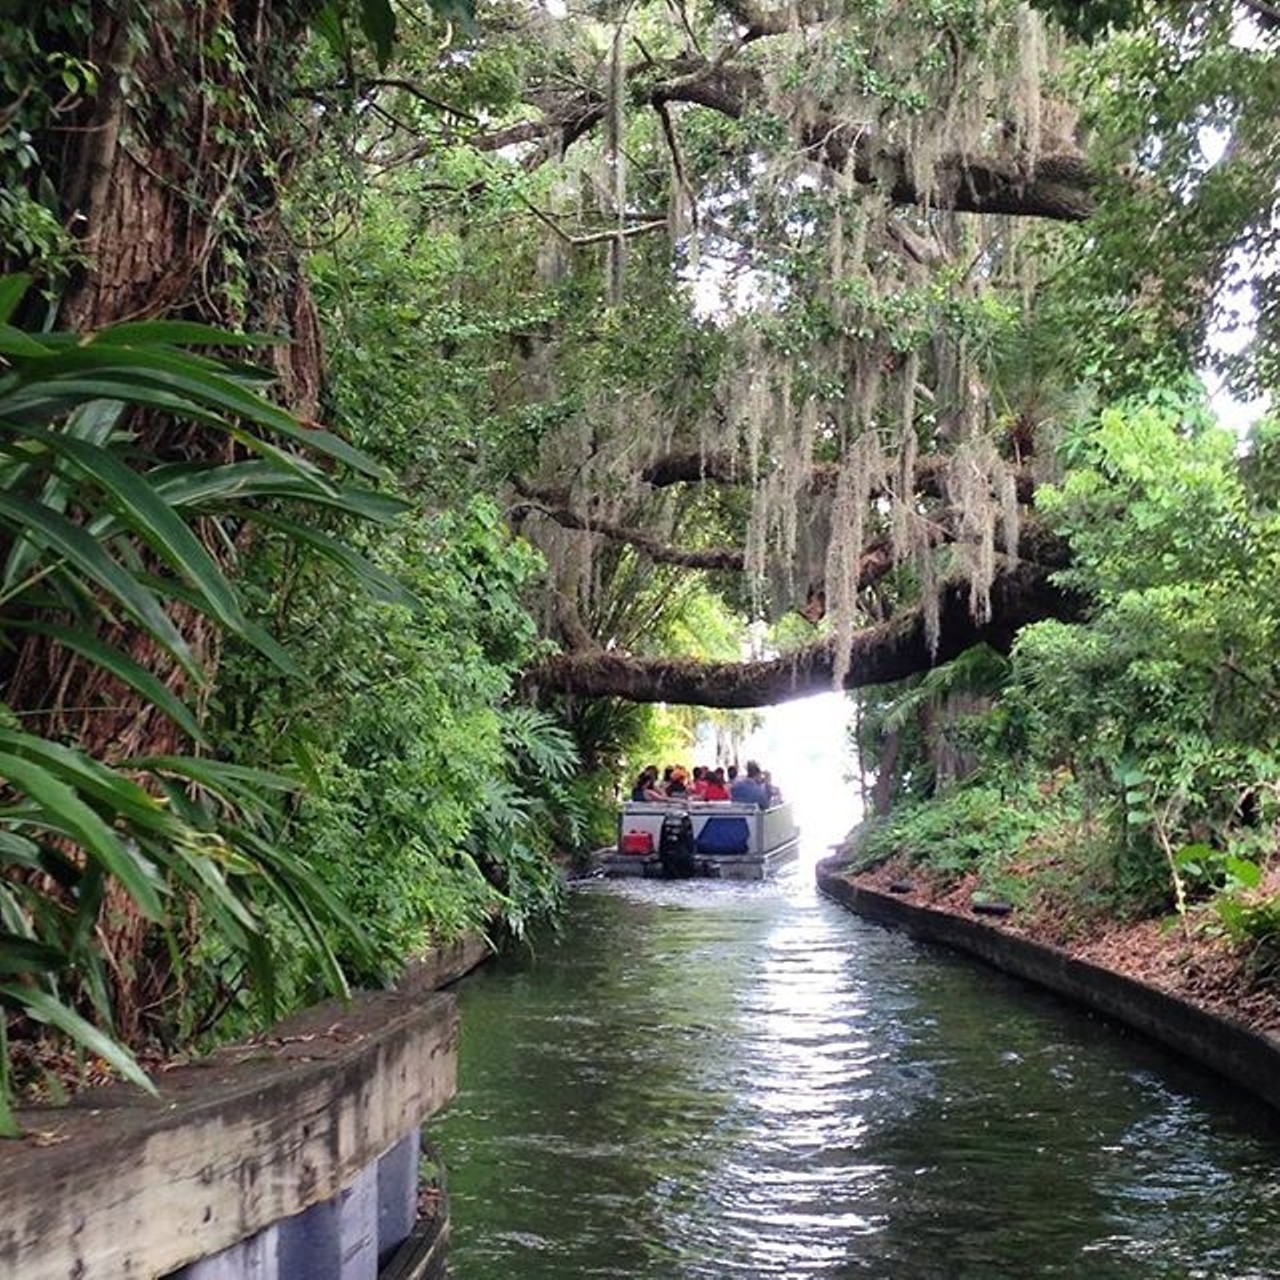  Scenic Boat Tour 
312 East Morse Blvd., Winter Park, 407-644-4056, $14 
Go on an 18-passenger pontoon boat ride through three of the seven lakes and two canals in Winter Park. While you may get lucky and spot cranes or alligators during the tour, you&#146;ll definitely see large cypress trees, swaying palms, lush sub-tropical flowers and views of extravagant homes along the banks. Tours leave on the hour from 10 a.m. to 4 p.m.  
Photo via babycat4everz/Instagram